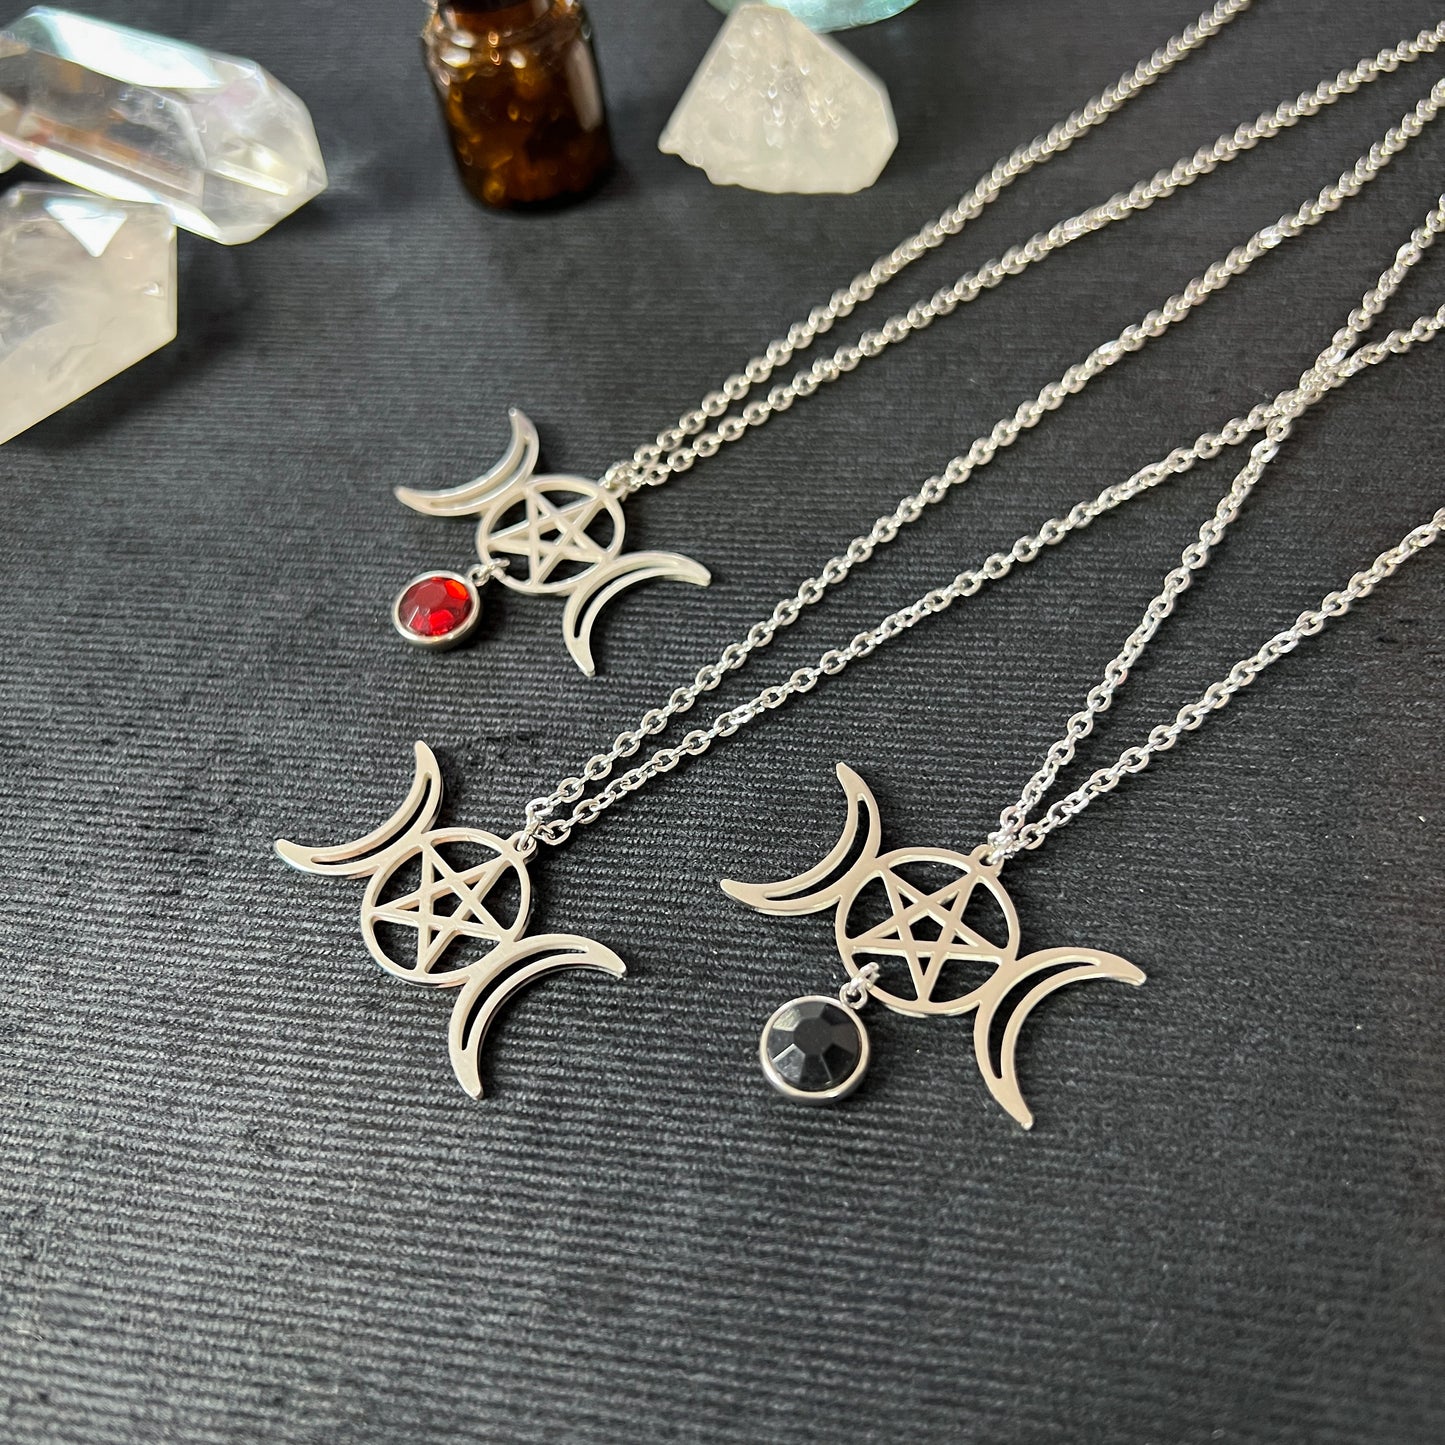 Triple moon and pentacle necklace wiccan jewelry made of stainless steel Baguette Magick